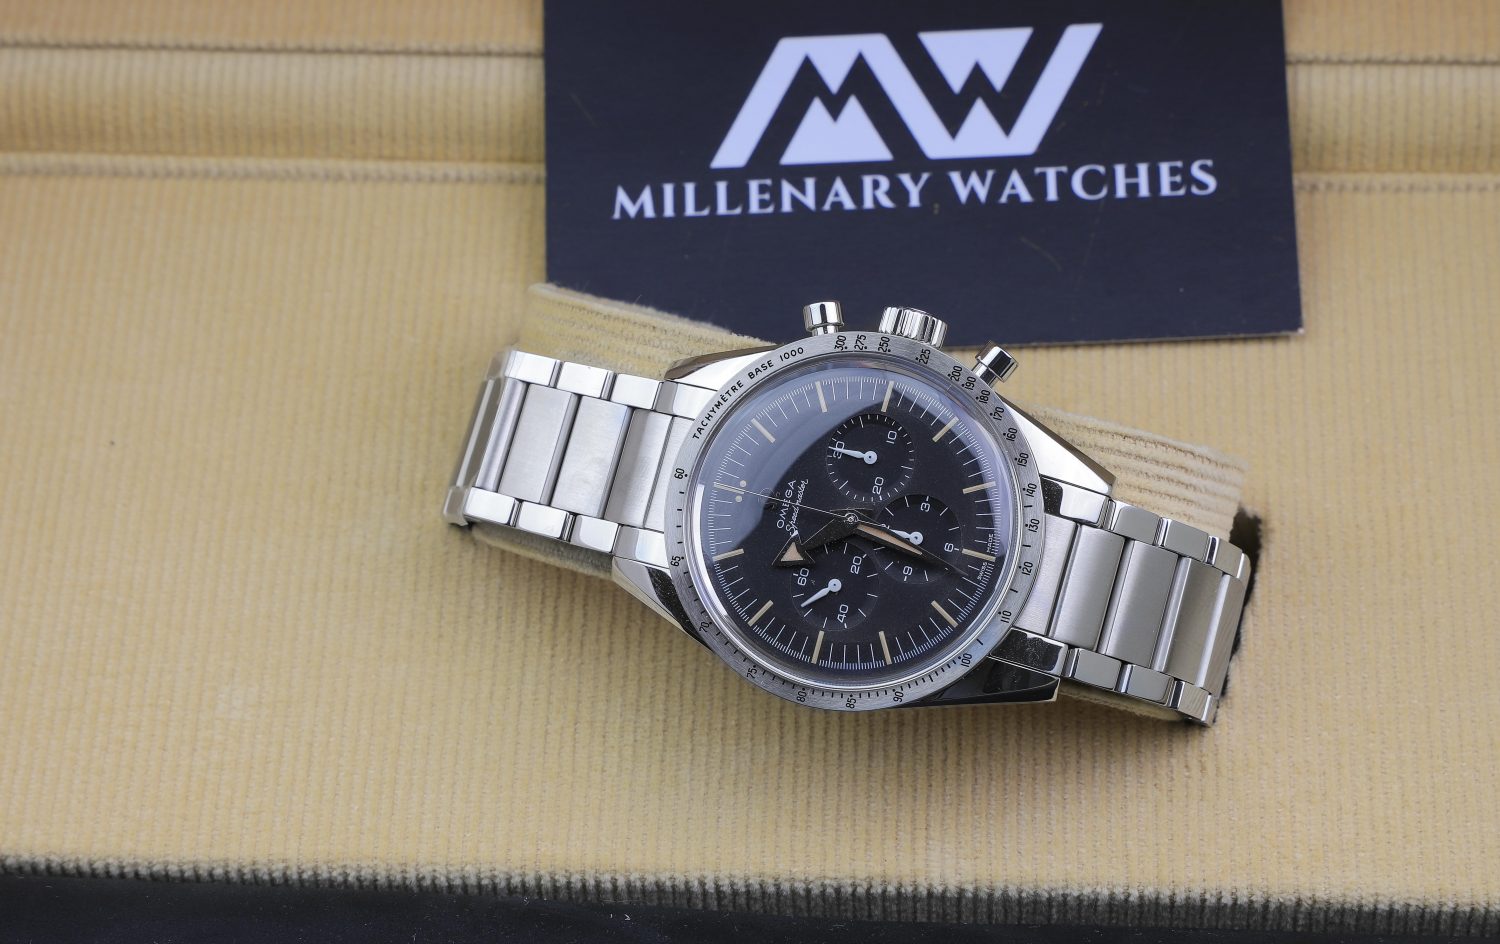  Do Omega Watches Hold Their Value?